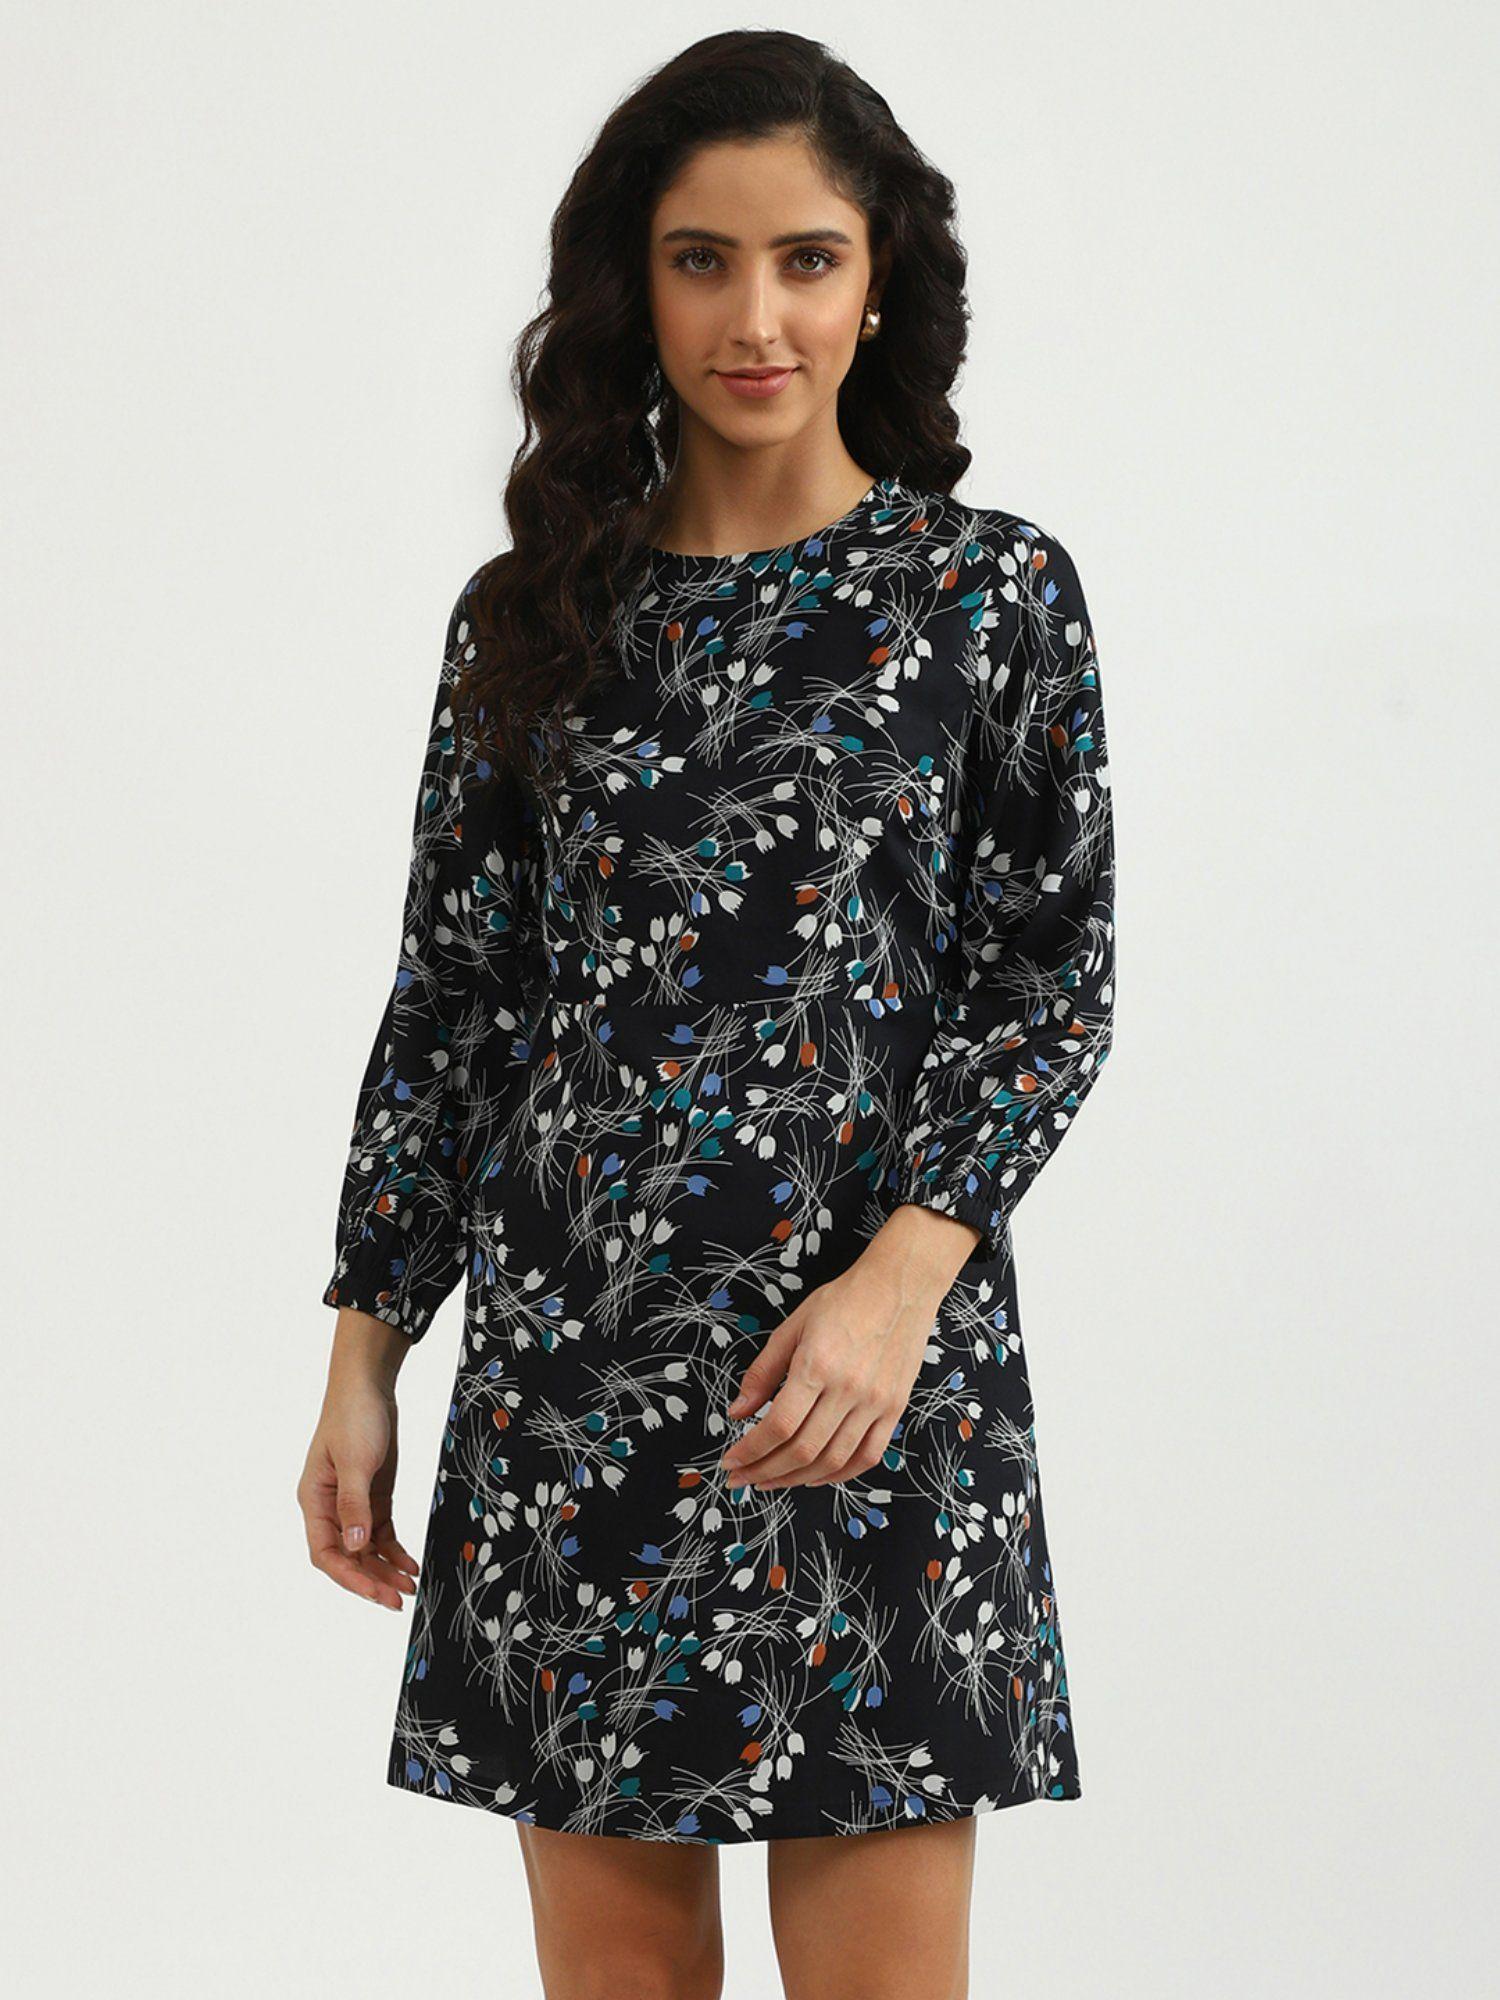 black-and-multi-color-round-neck-printed-dress